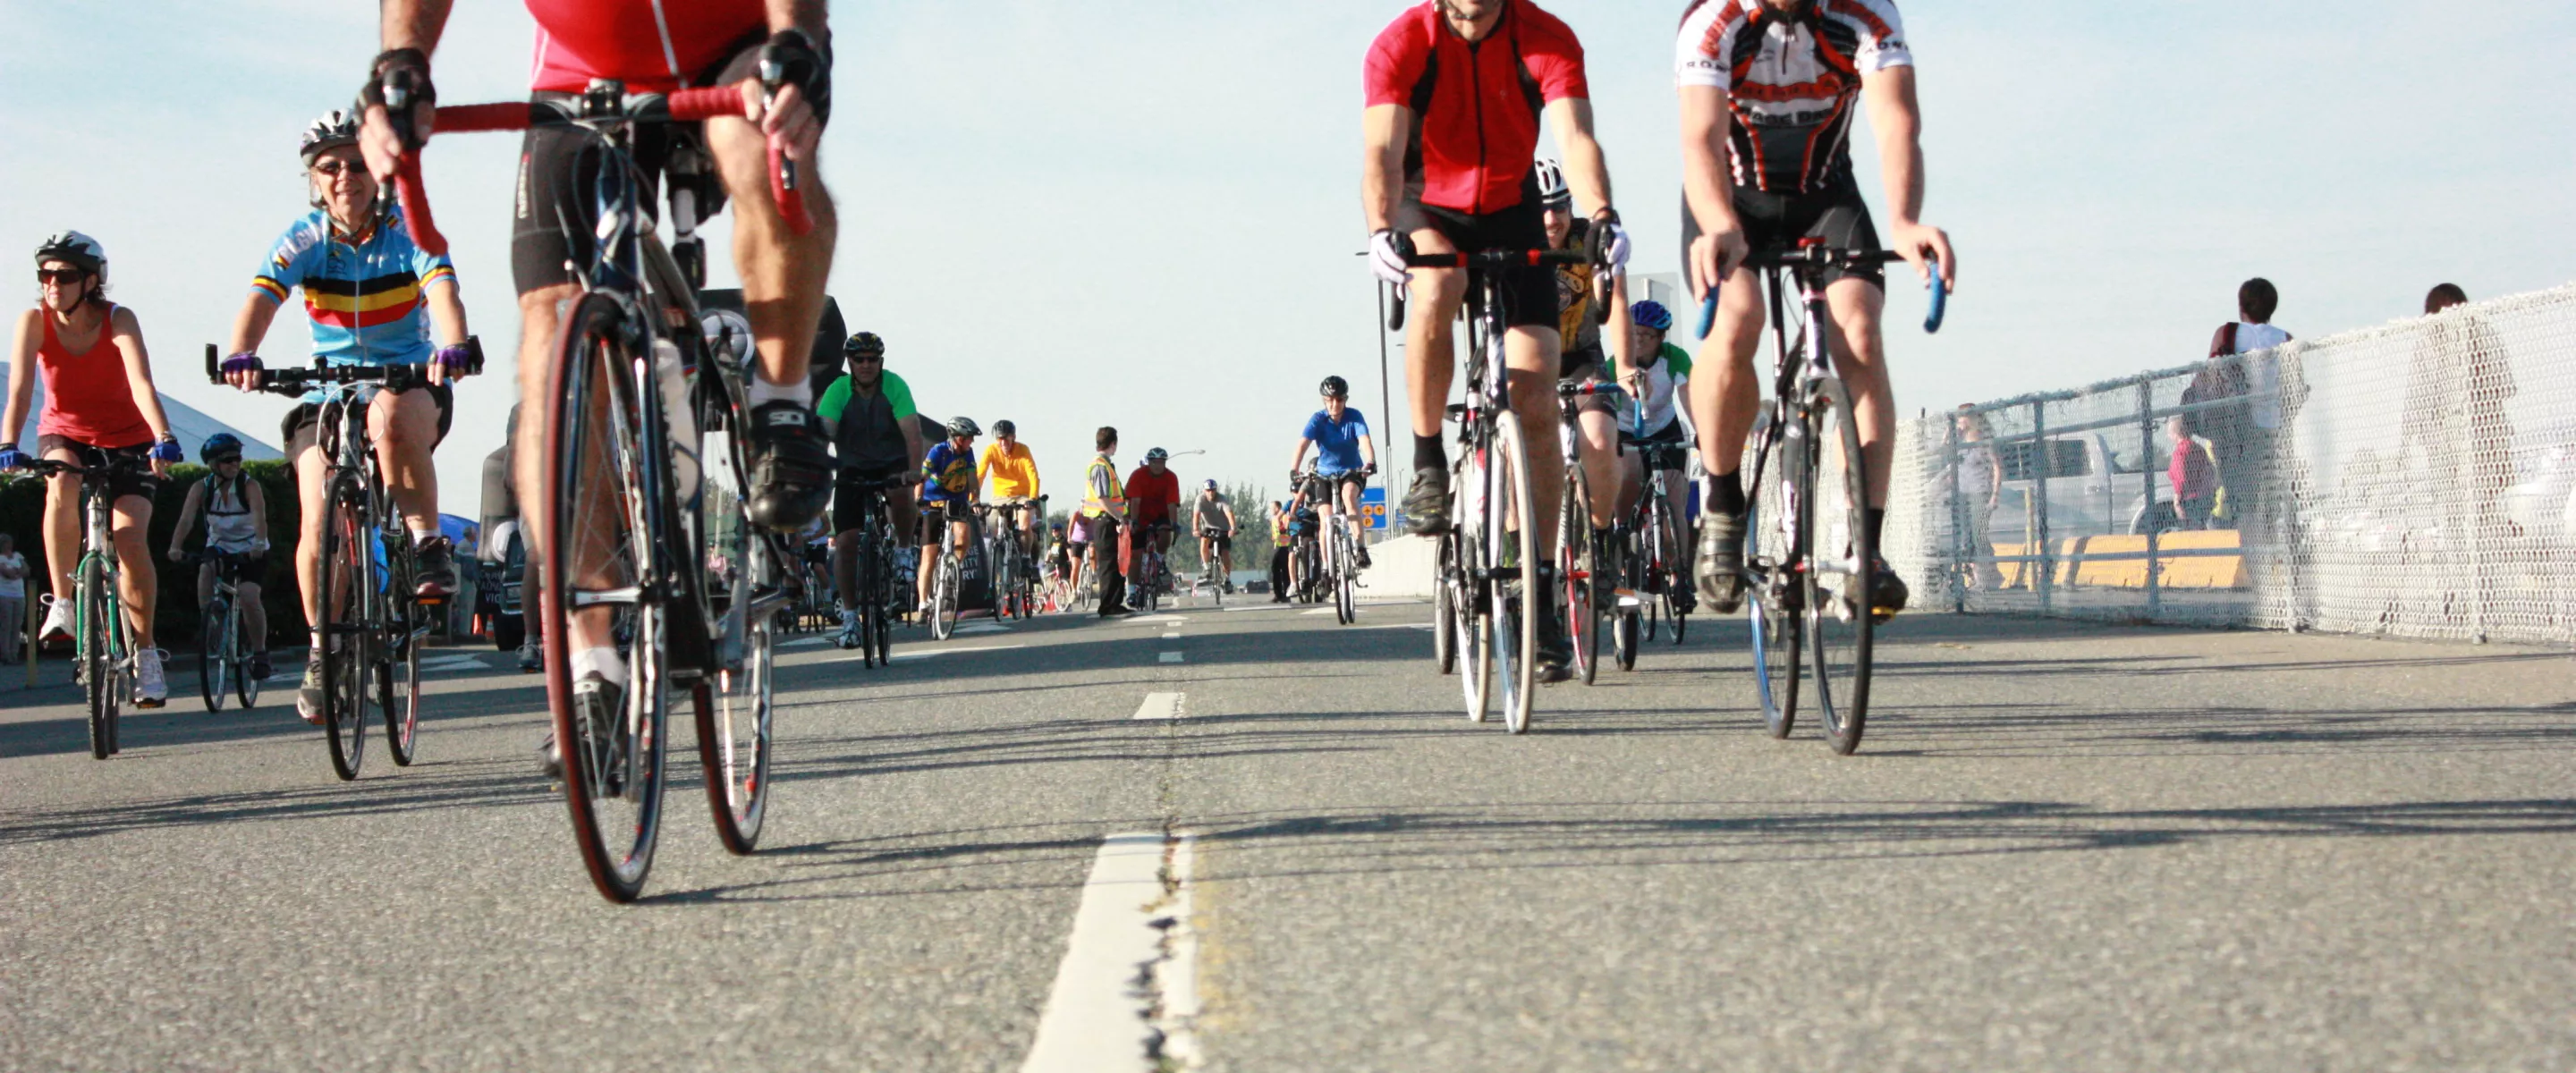 A group of cyclists bicycling toward the camera lens.